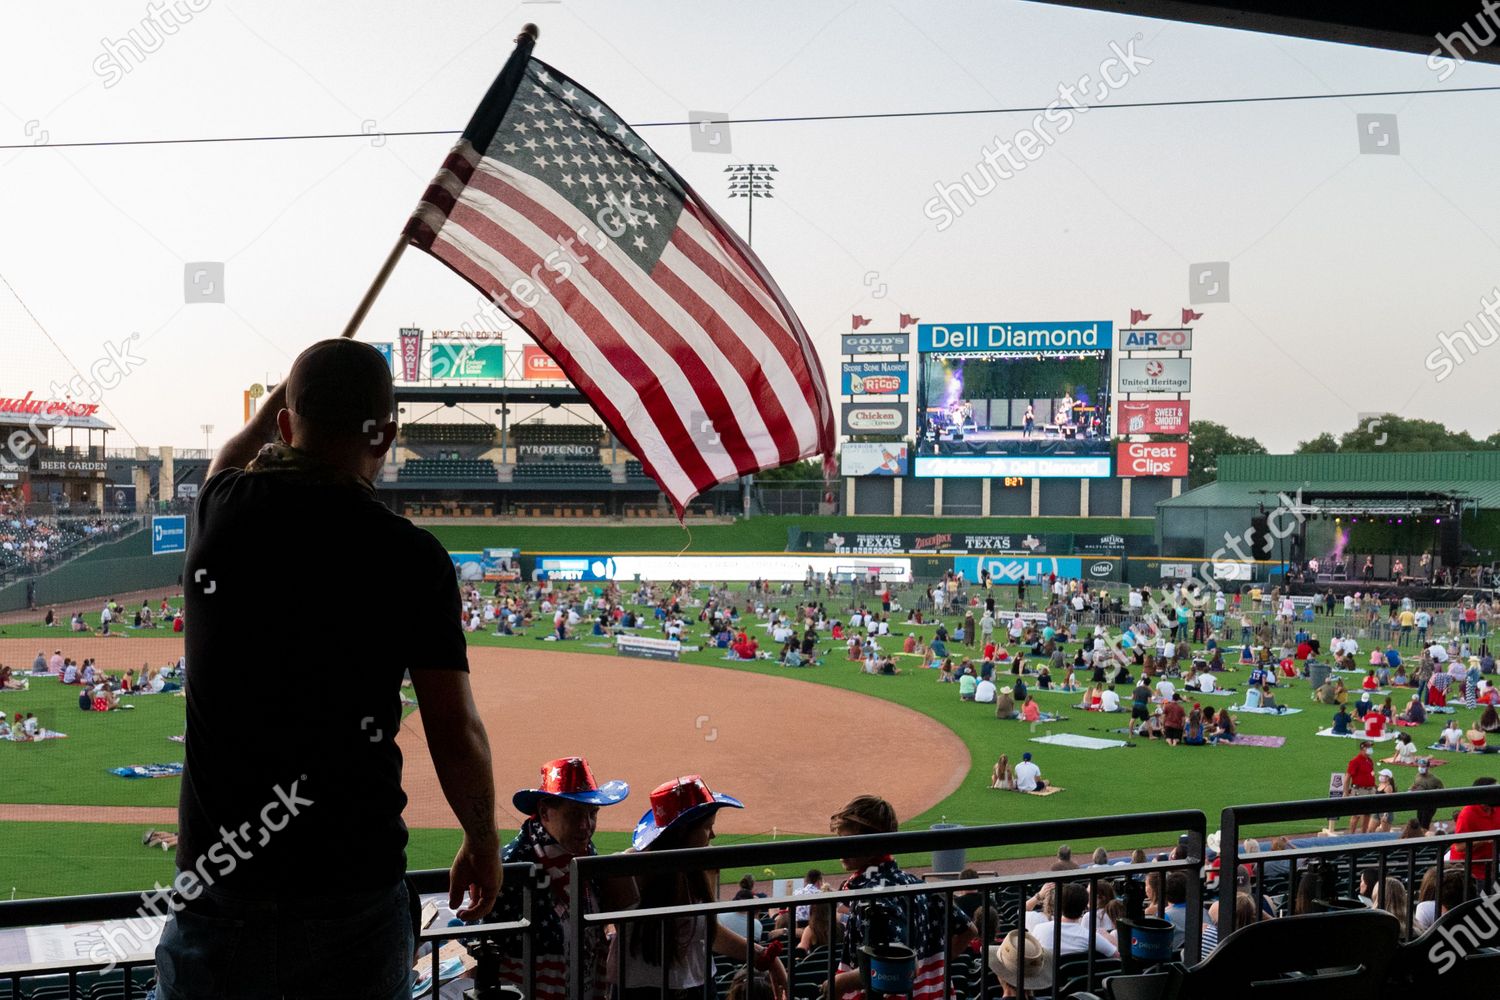 round rock halloween at dell diamond 2020 Fan Waves American Flag While County Music Editorial Stock Photo Stock Image Shutterstock round rock halloween at dell diamond 2020